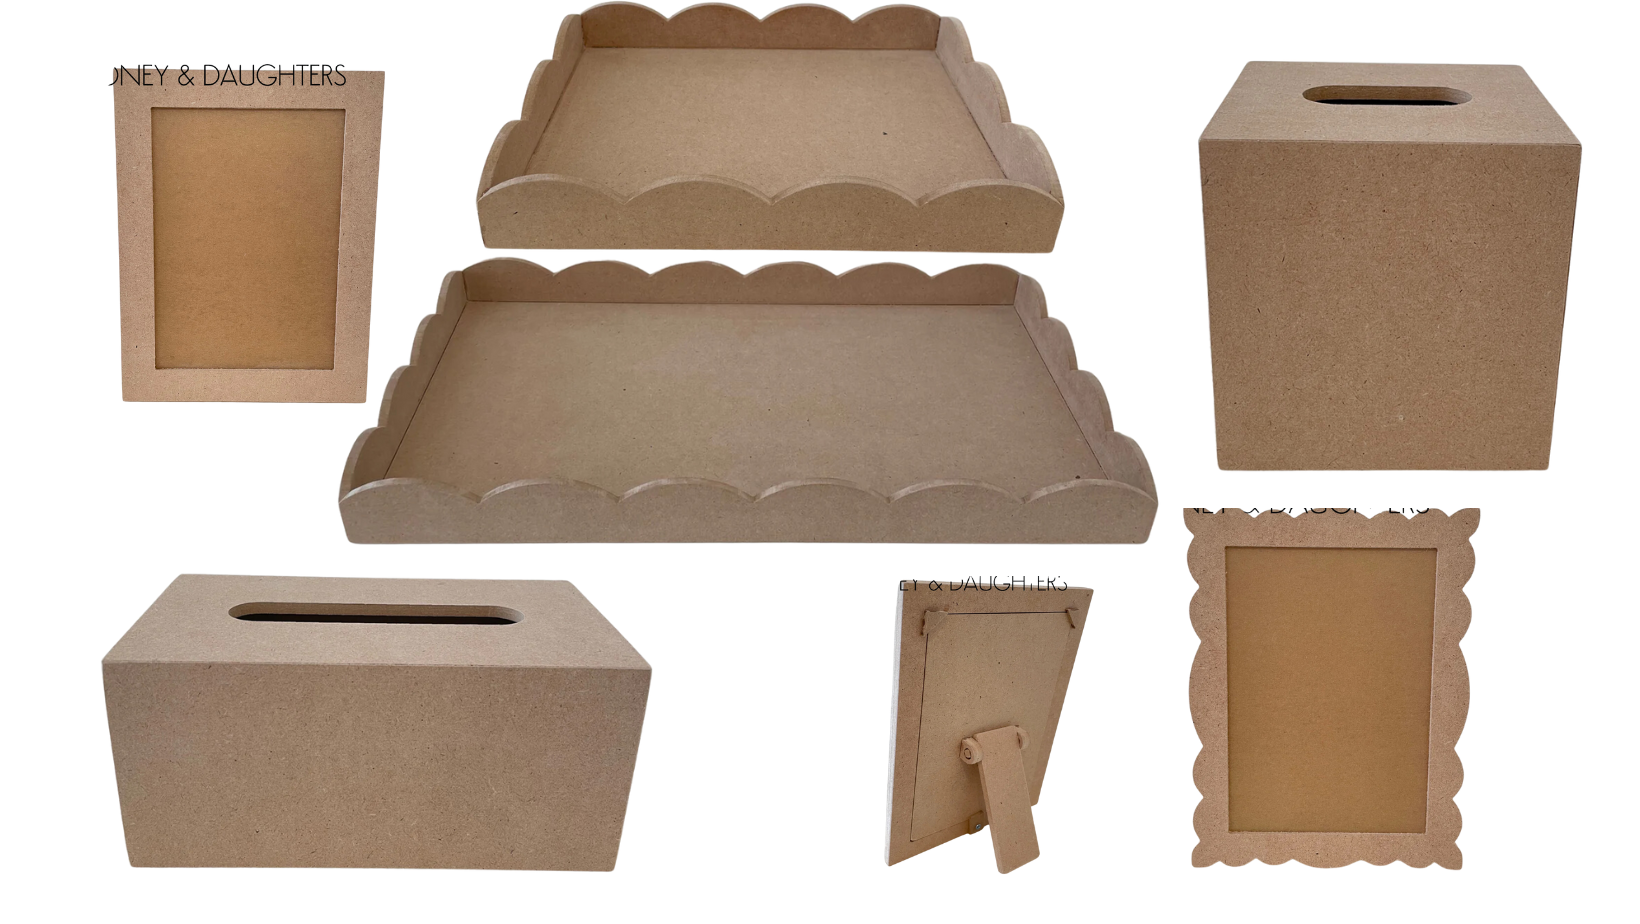 Undecorated MDF collection